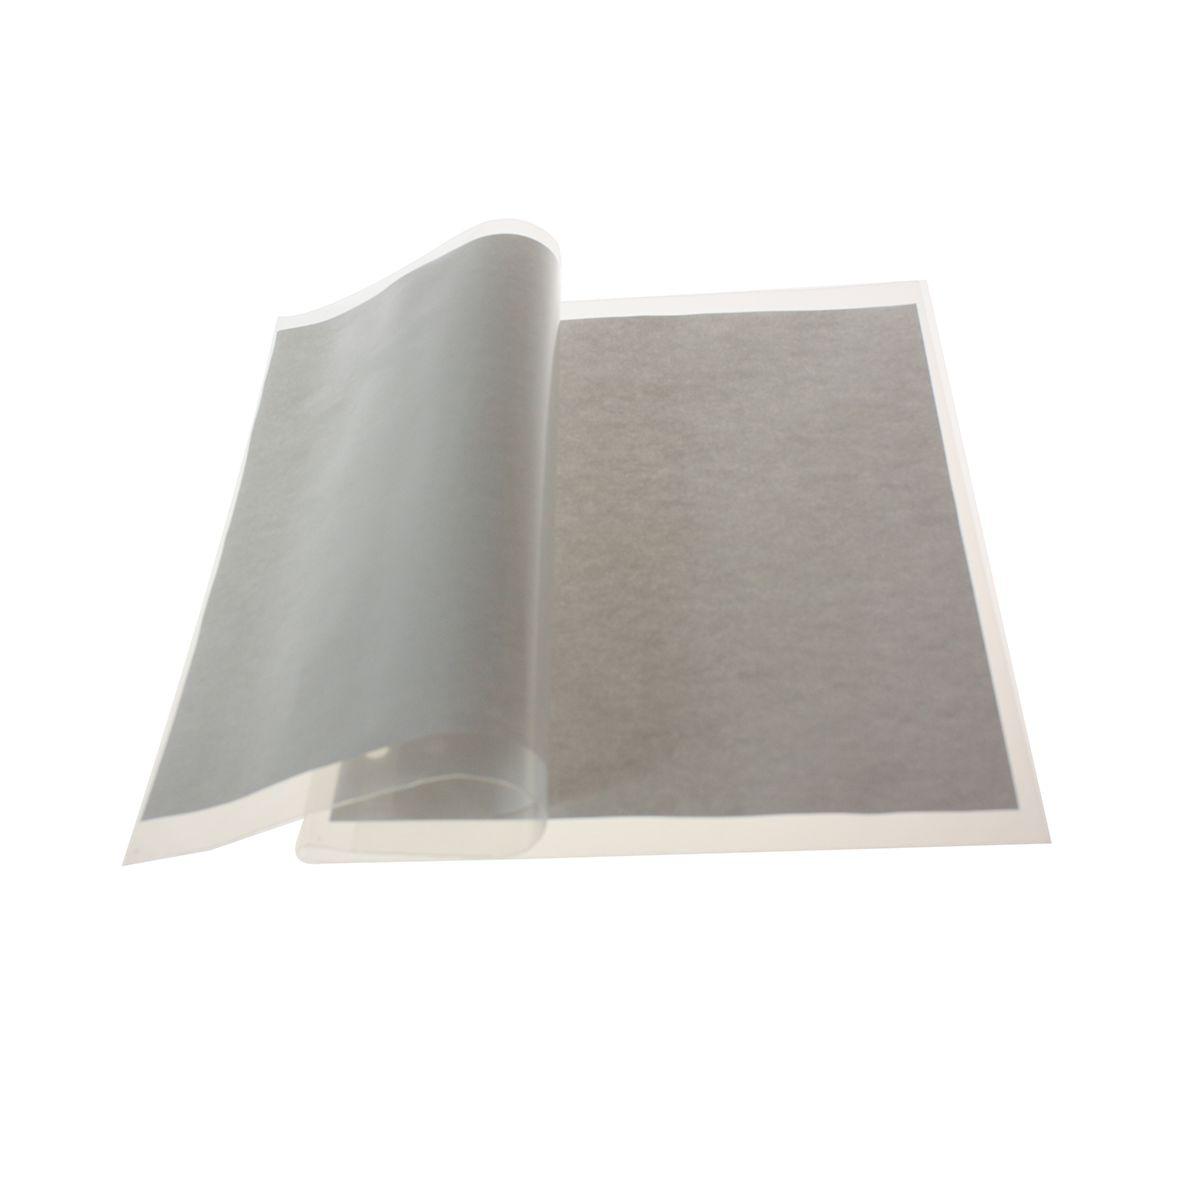 Clear Poly 4-page sleeve - 12" x 18" (Case of 100)